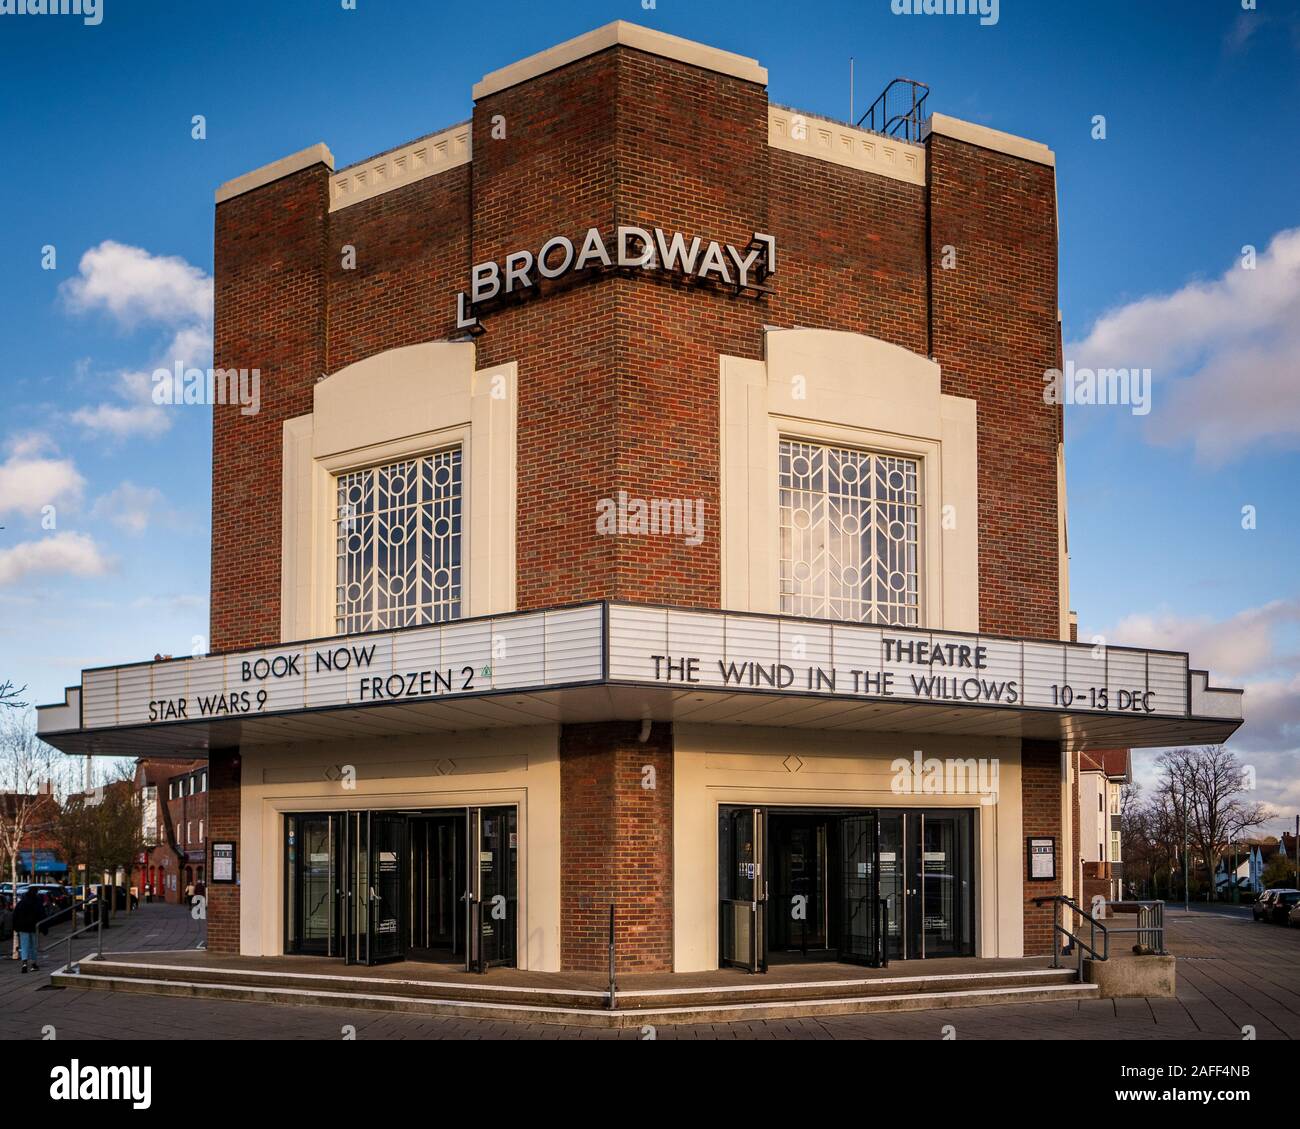 Letchworth Garden City Broadway Cinema and Theatre. Built in 1936 in art deco style. Architects Bennett and Bidwell. Stock Photo